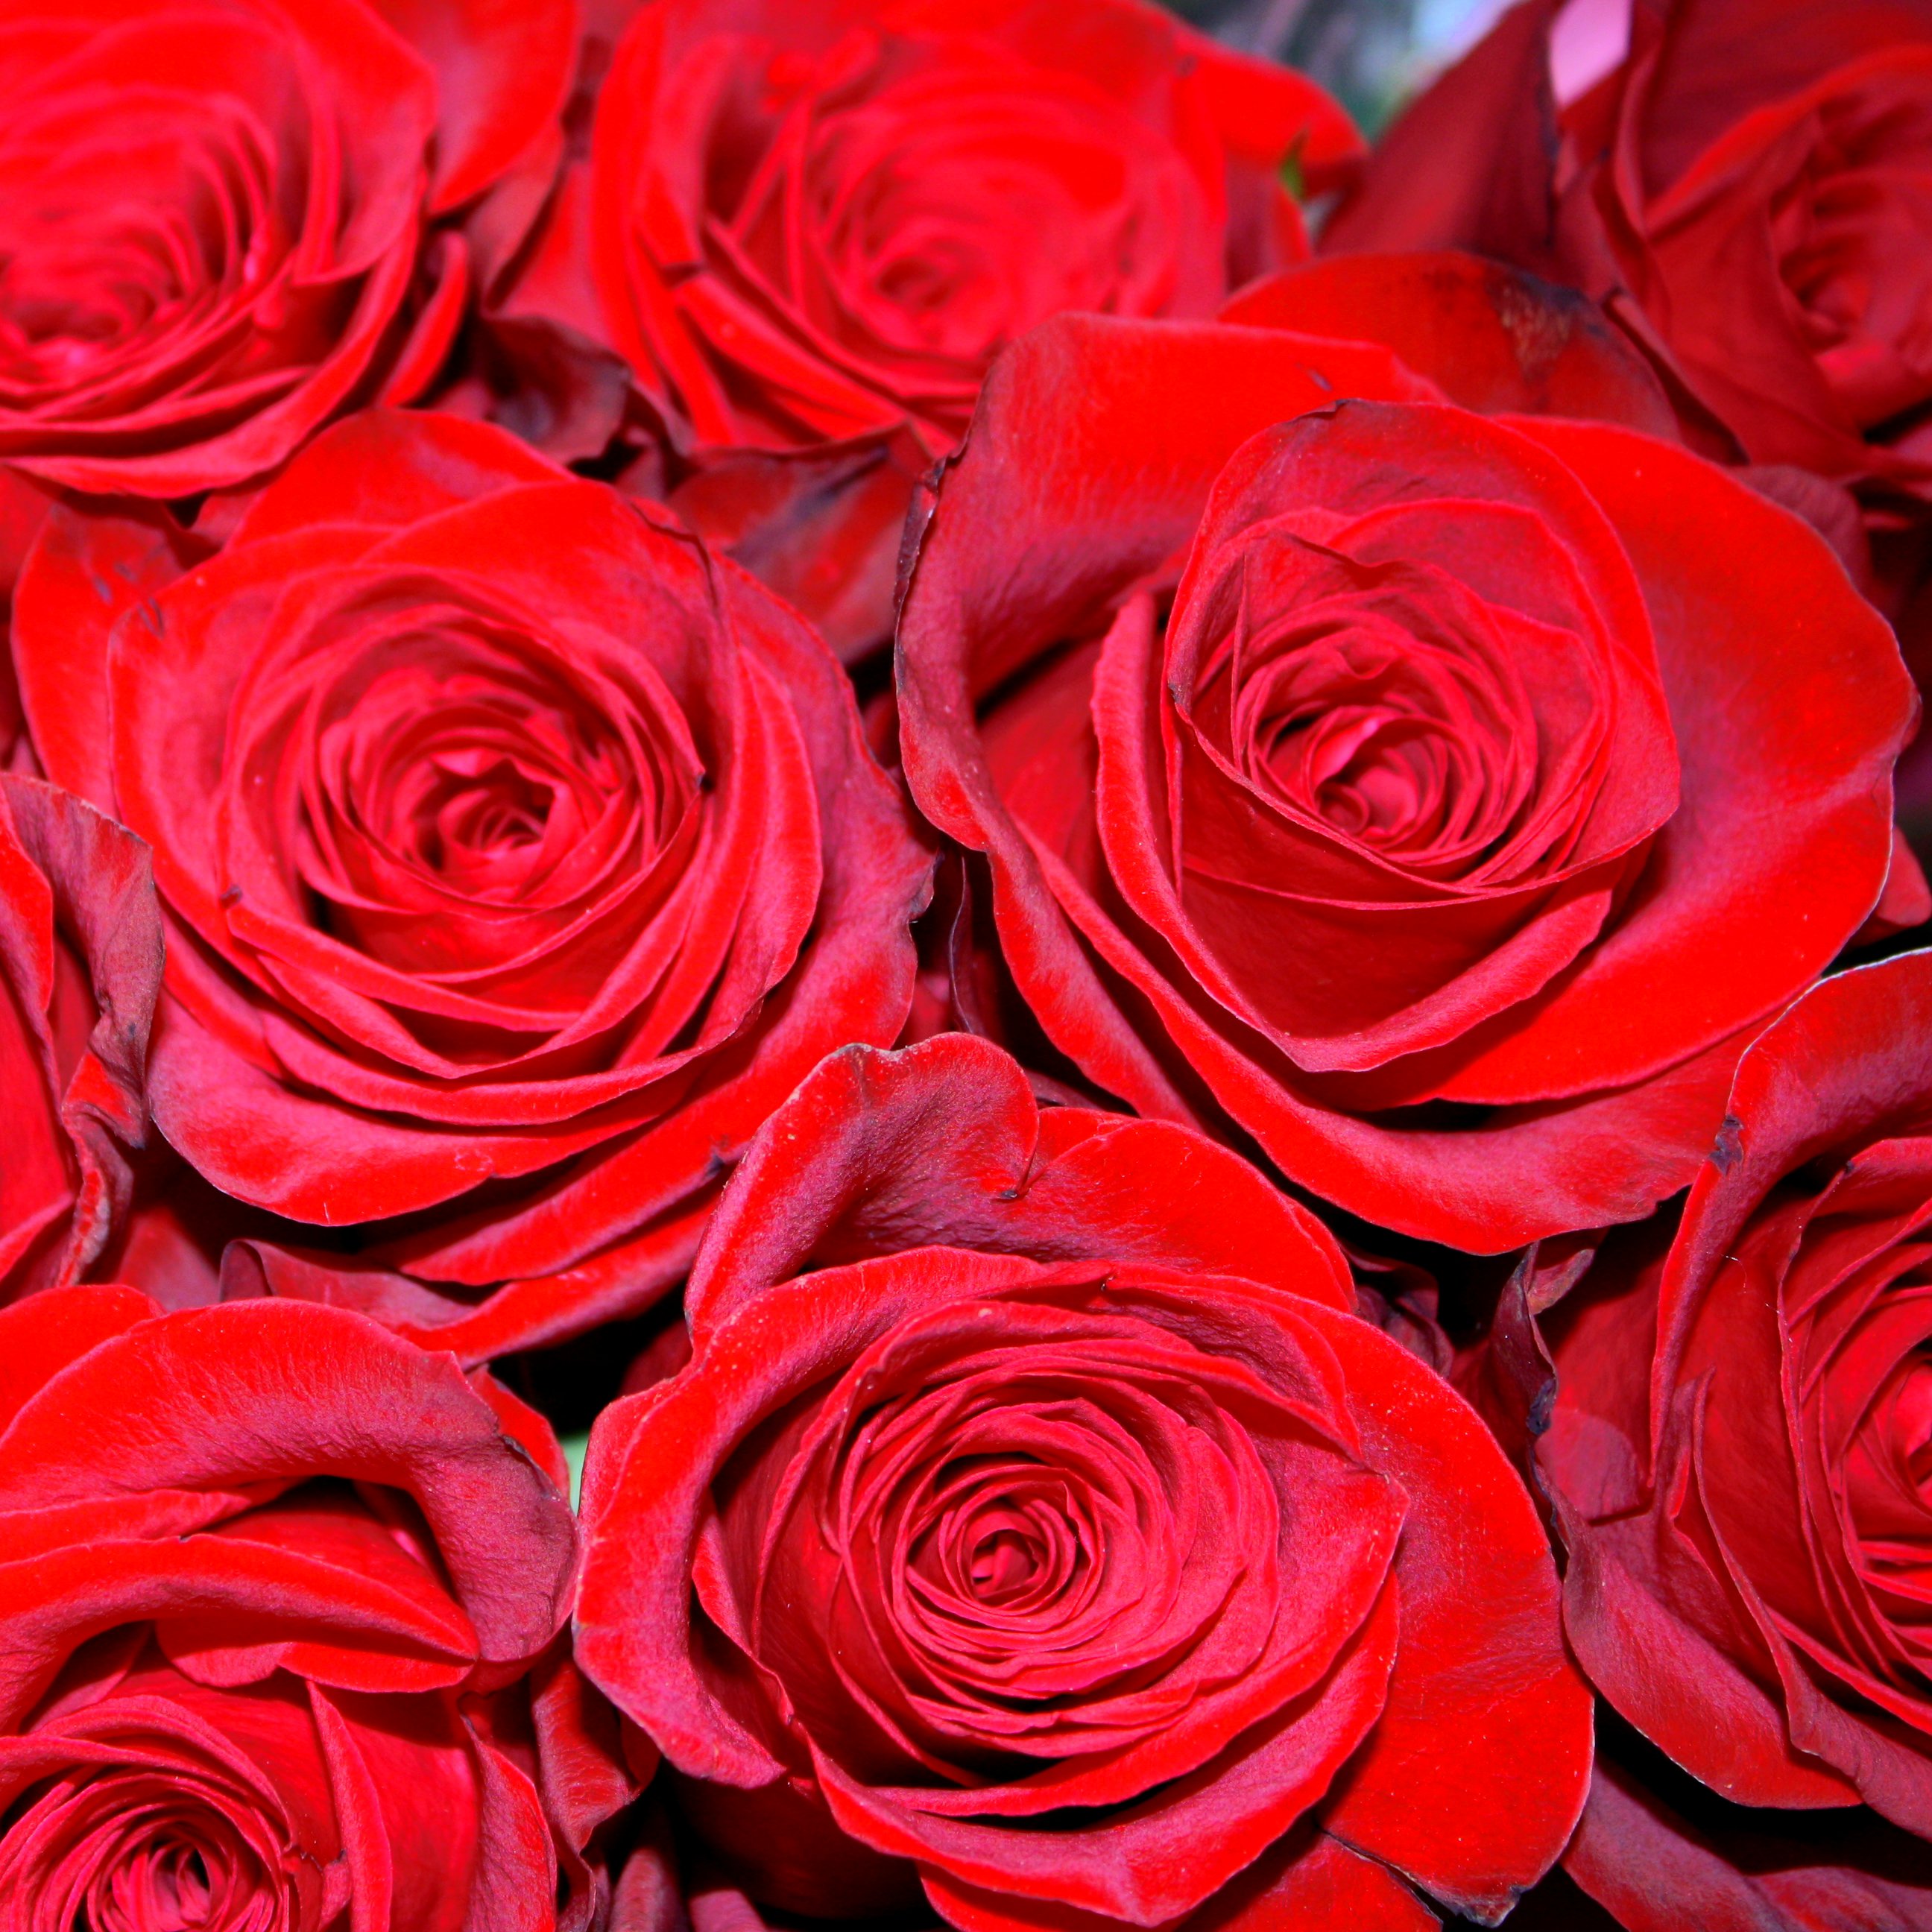 Red Roses Picture | Free Photograph | Photos Public Domain